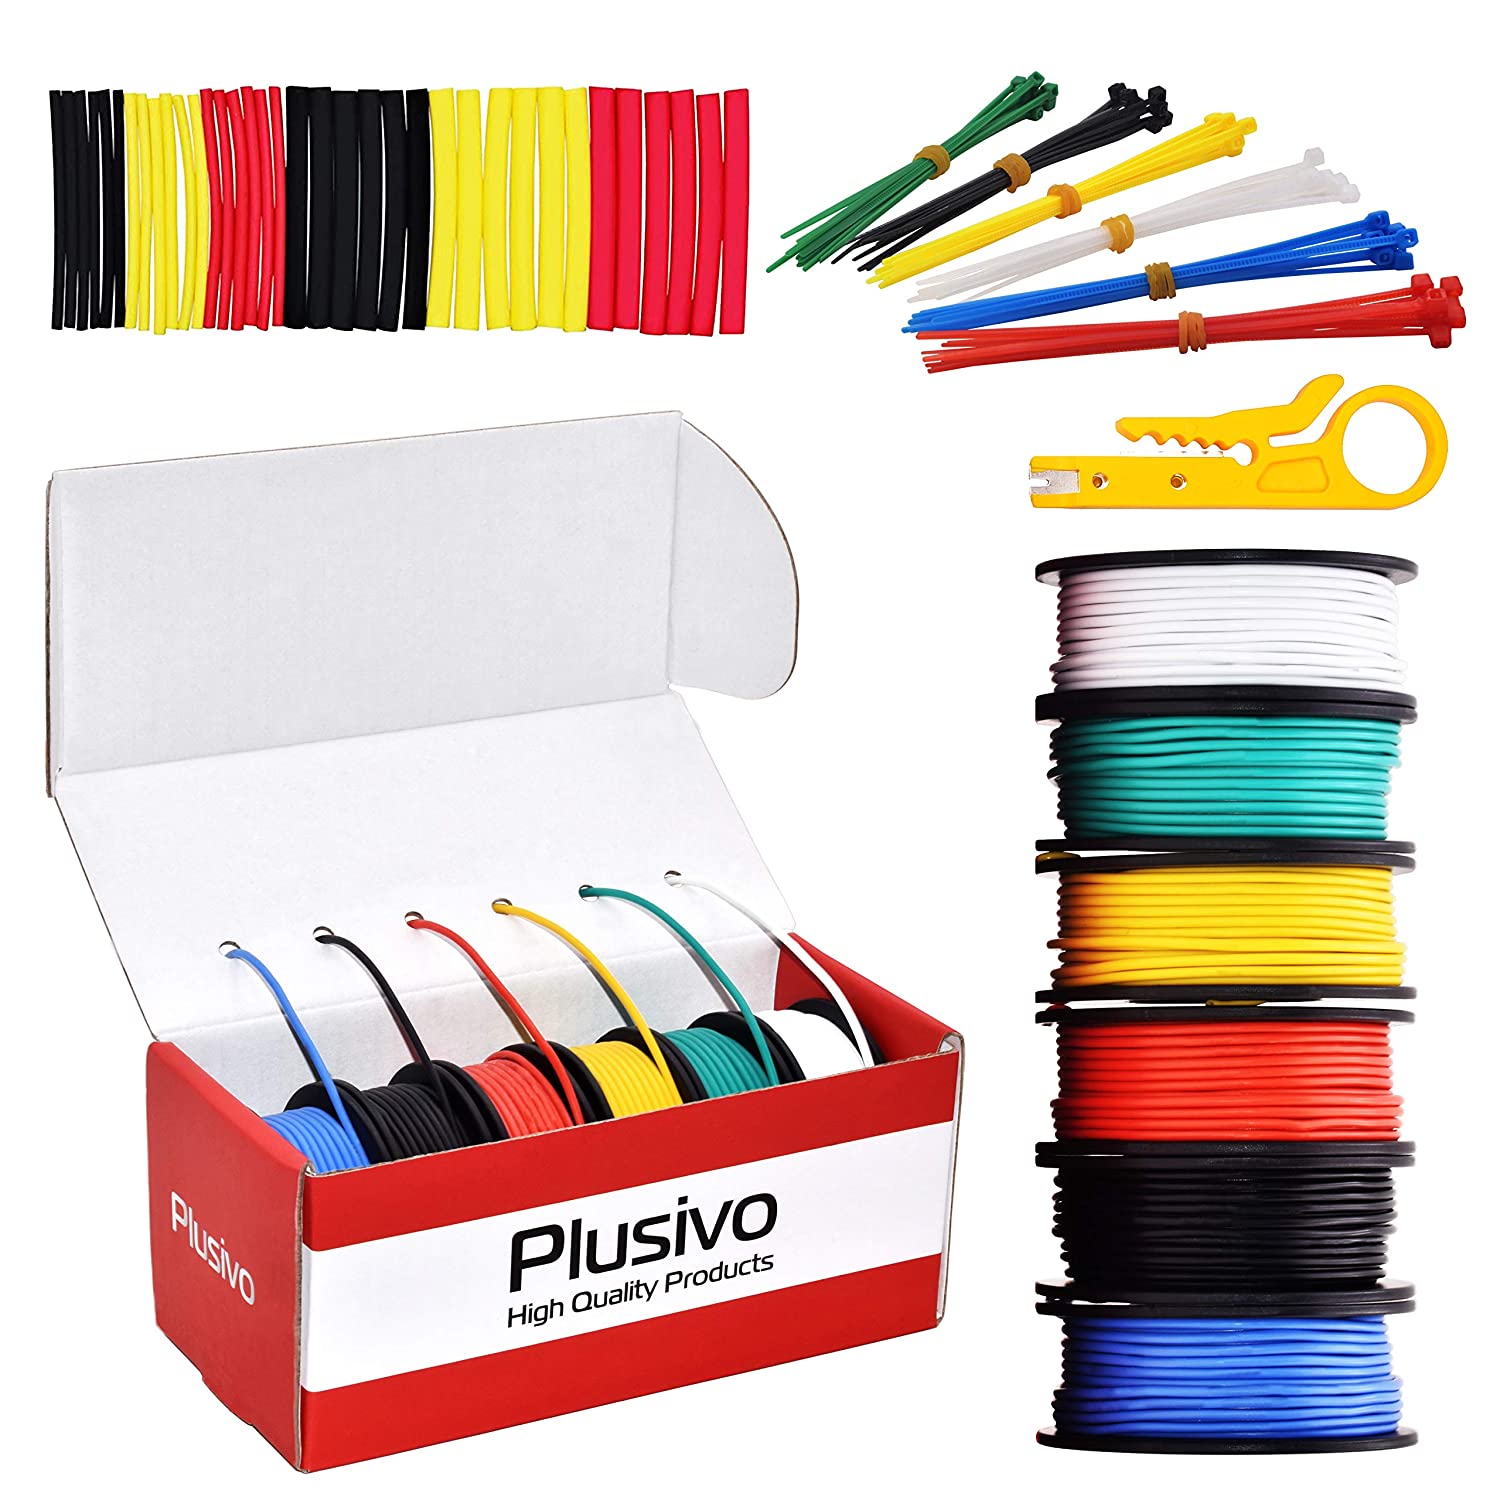 Plusivo 18AWG Hook up Wire Kit - 600V Tinned Stranded Silicone Wire of 6  Different Colors x 16 ft each